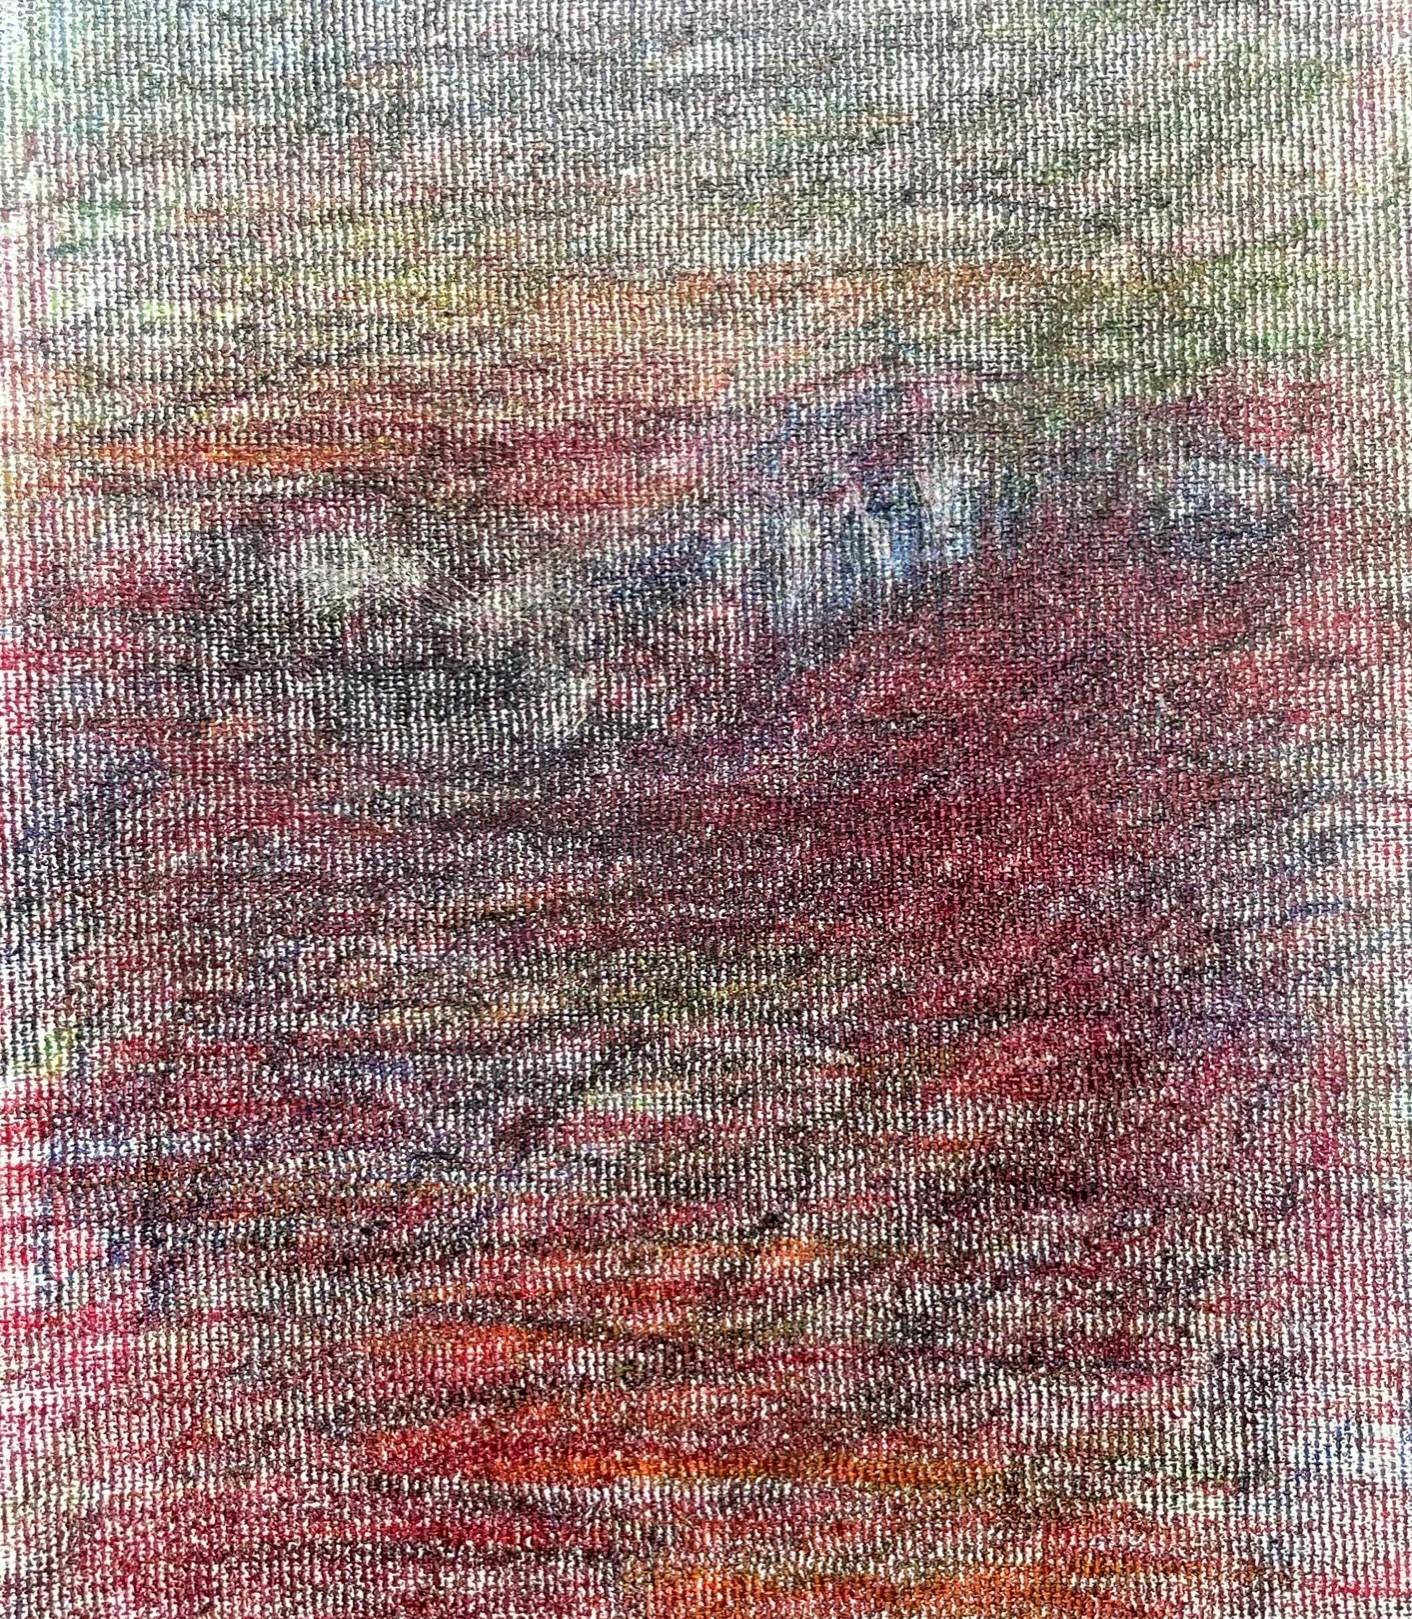 Body in the Field #2 - Red, Blue, Drawing, Coloured Pencils, Landscape - Gray Landscape Art by Zsolt Berszán